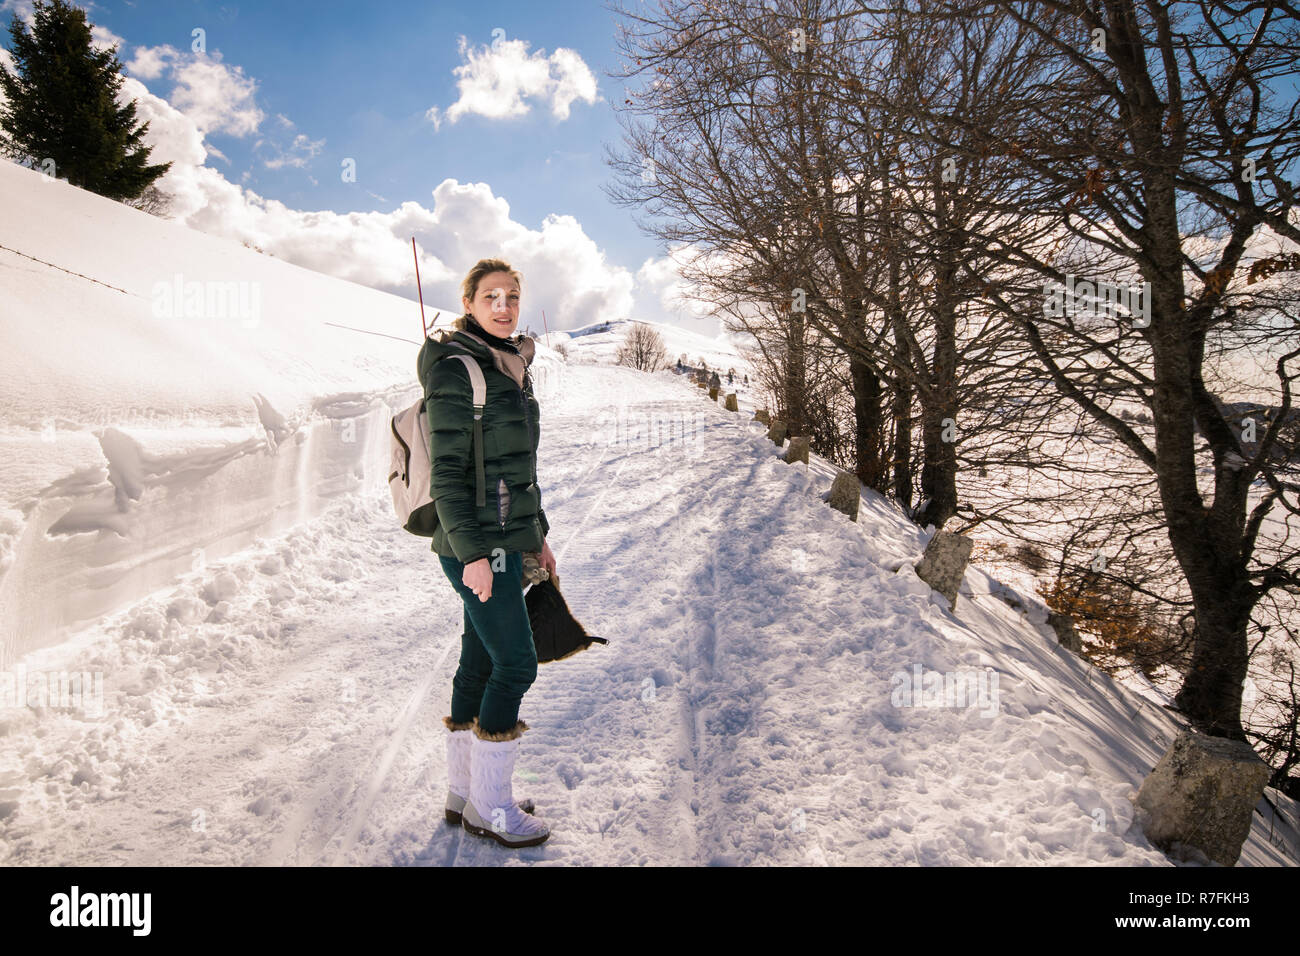 Trento, Italy - February 19, 2016: Young woman in a snowy mountain landscape on a beautiful sunny day. Stock Photo